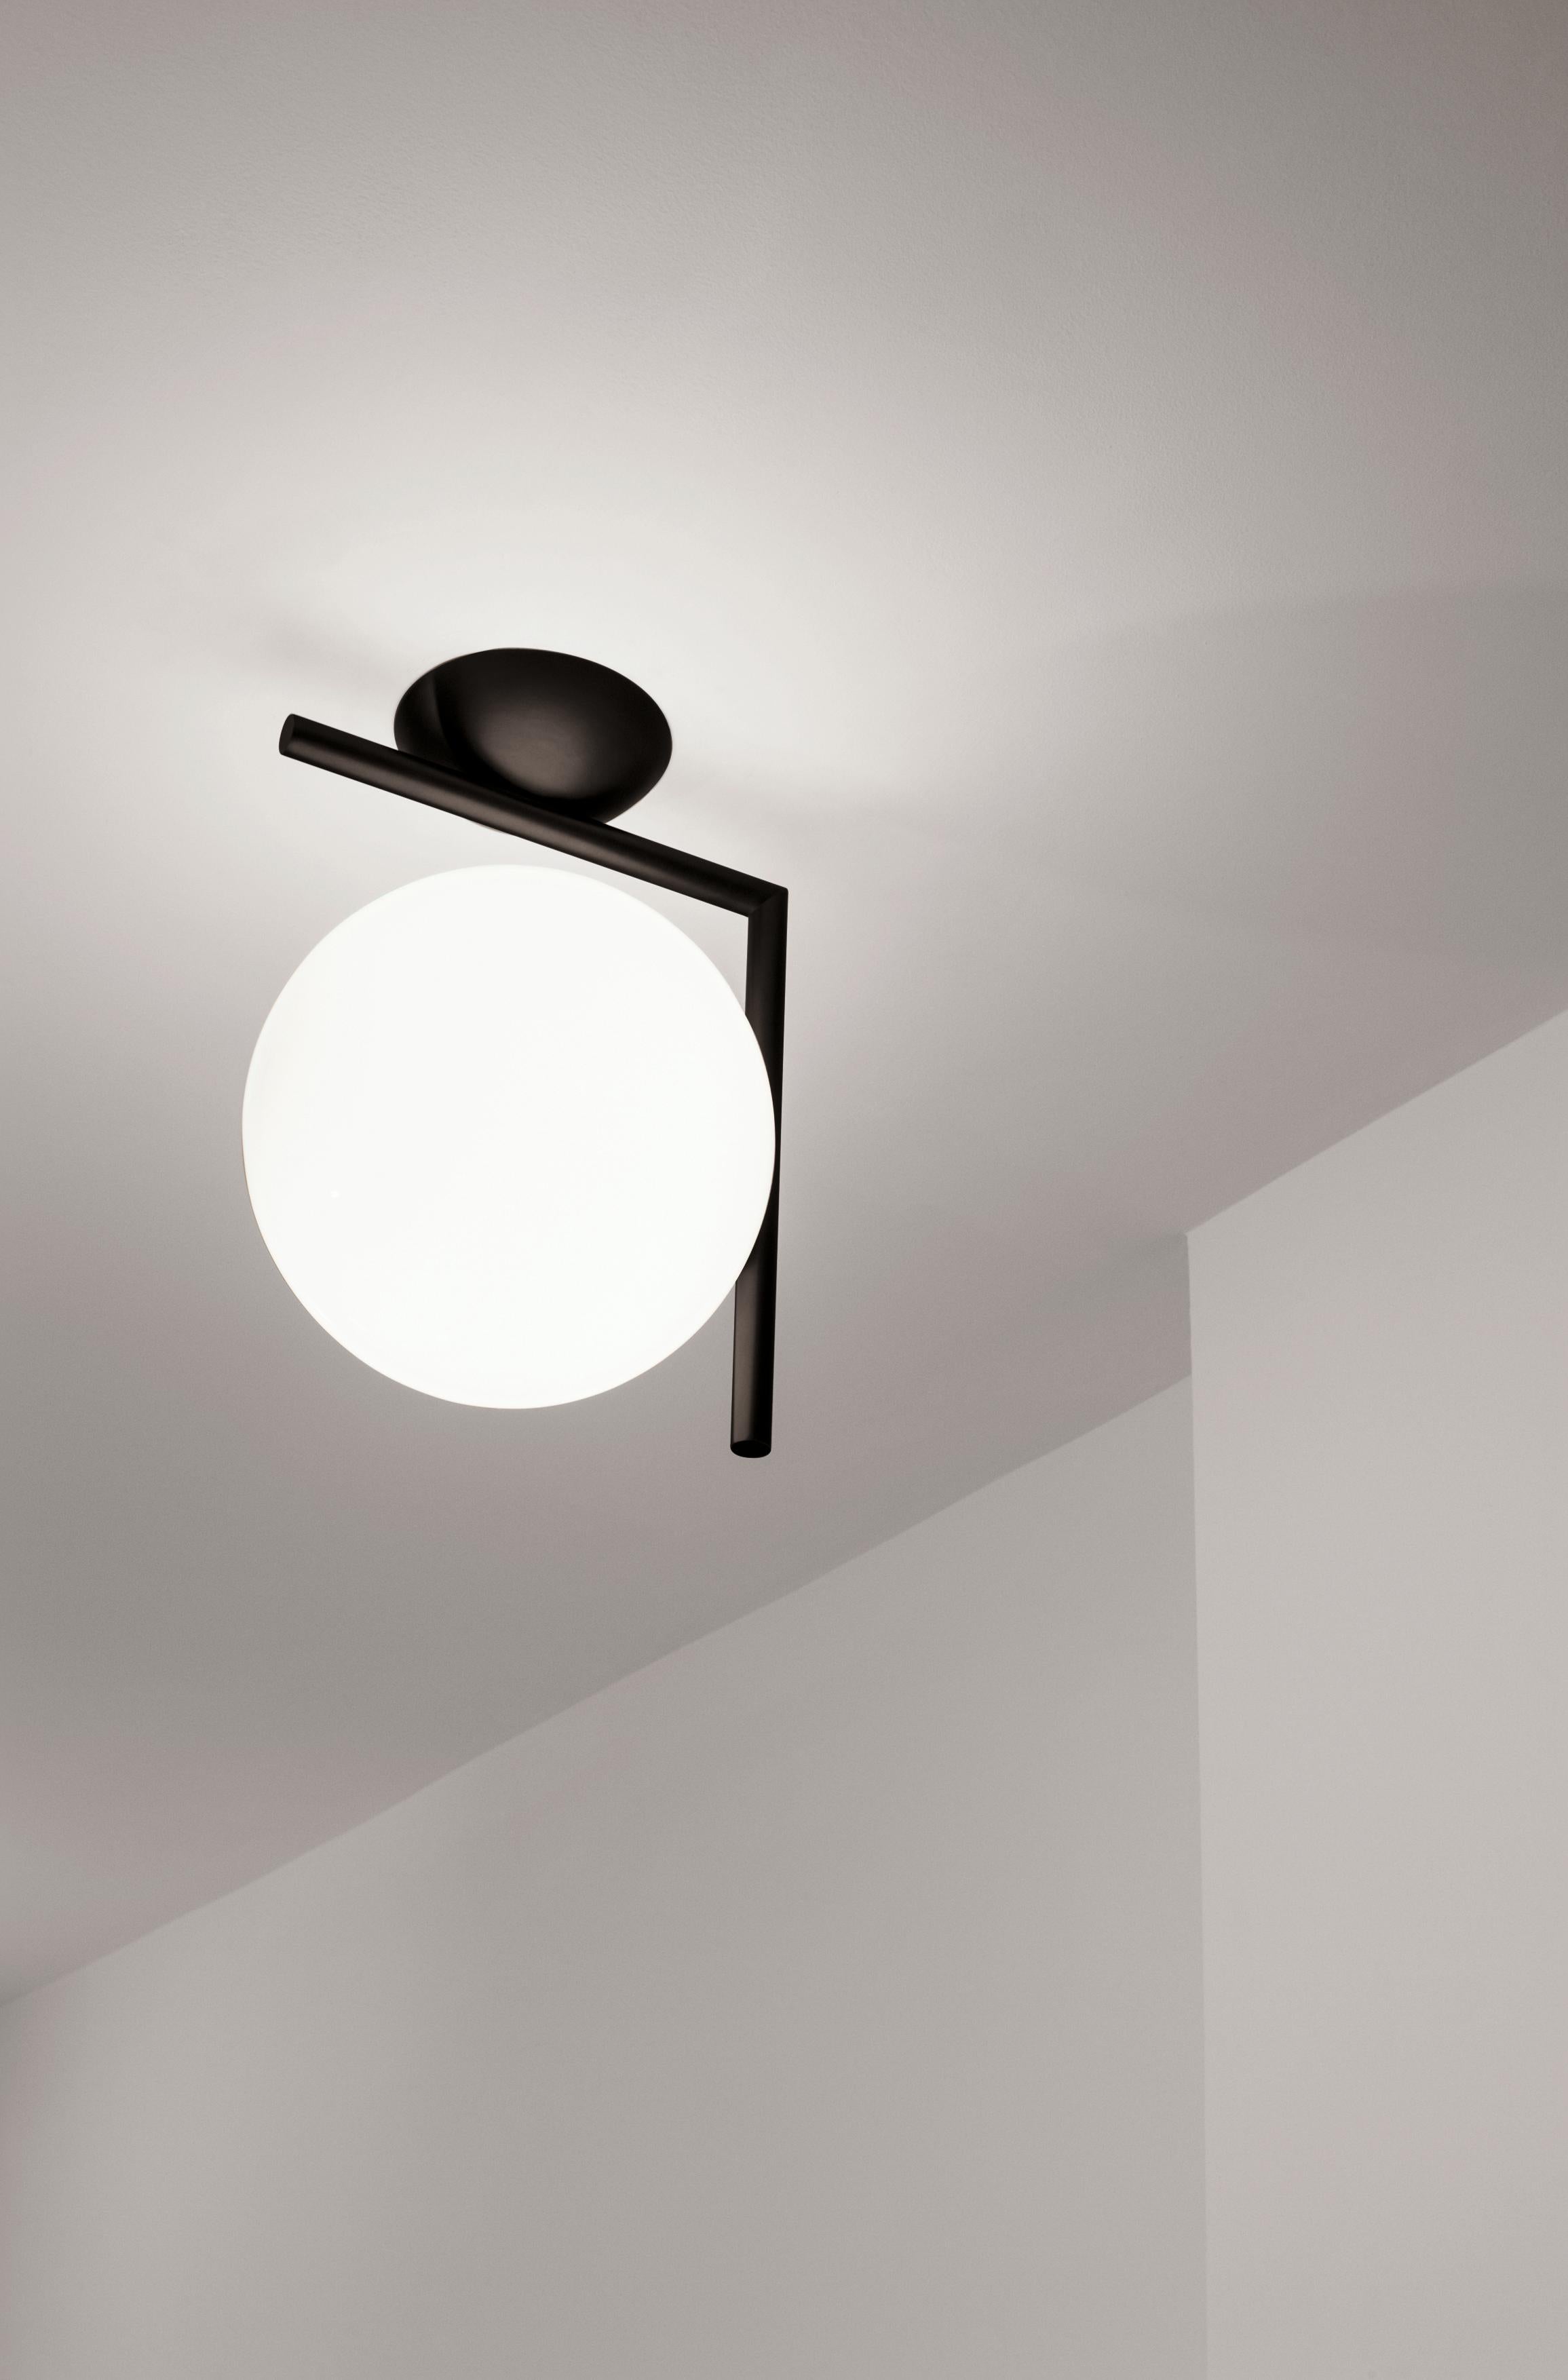  FLOS IC 1 Ceiling and Wall Light in Black by Michael Anastassiades
Radiant light, delicate balance: Like the other pieces in his IC Light Series, the IC C/W lamp showcases designer Michael Anastassiades’ love of Industrial simplicity as well as his